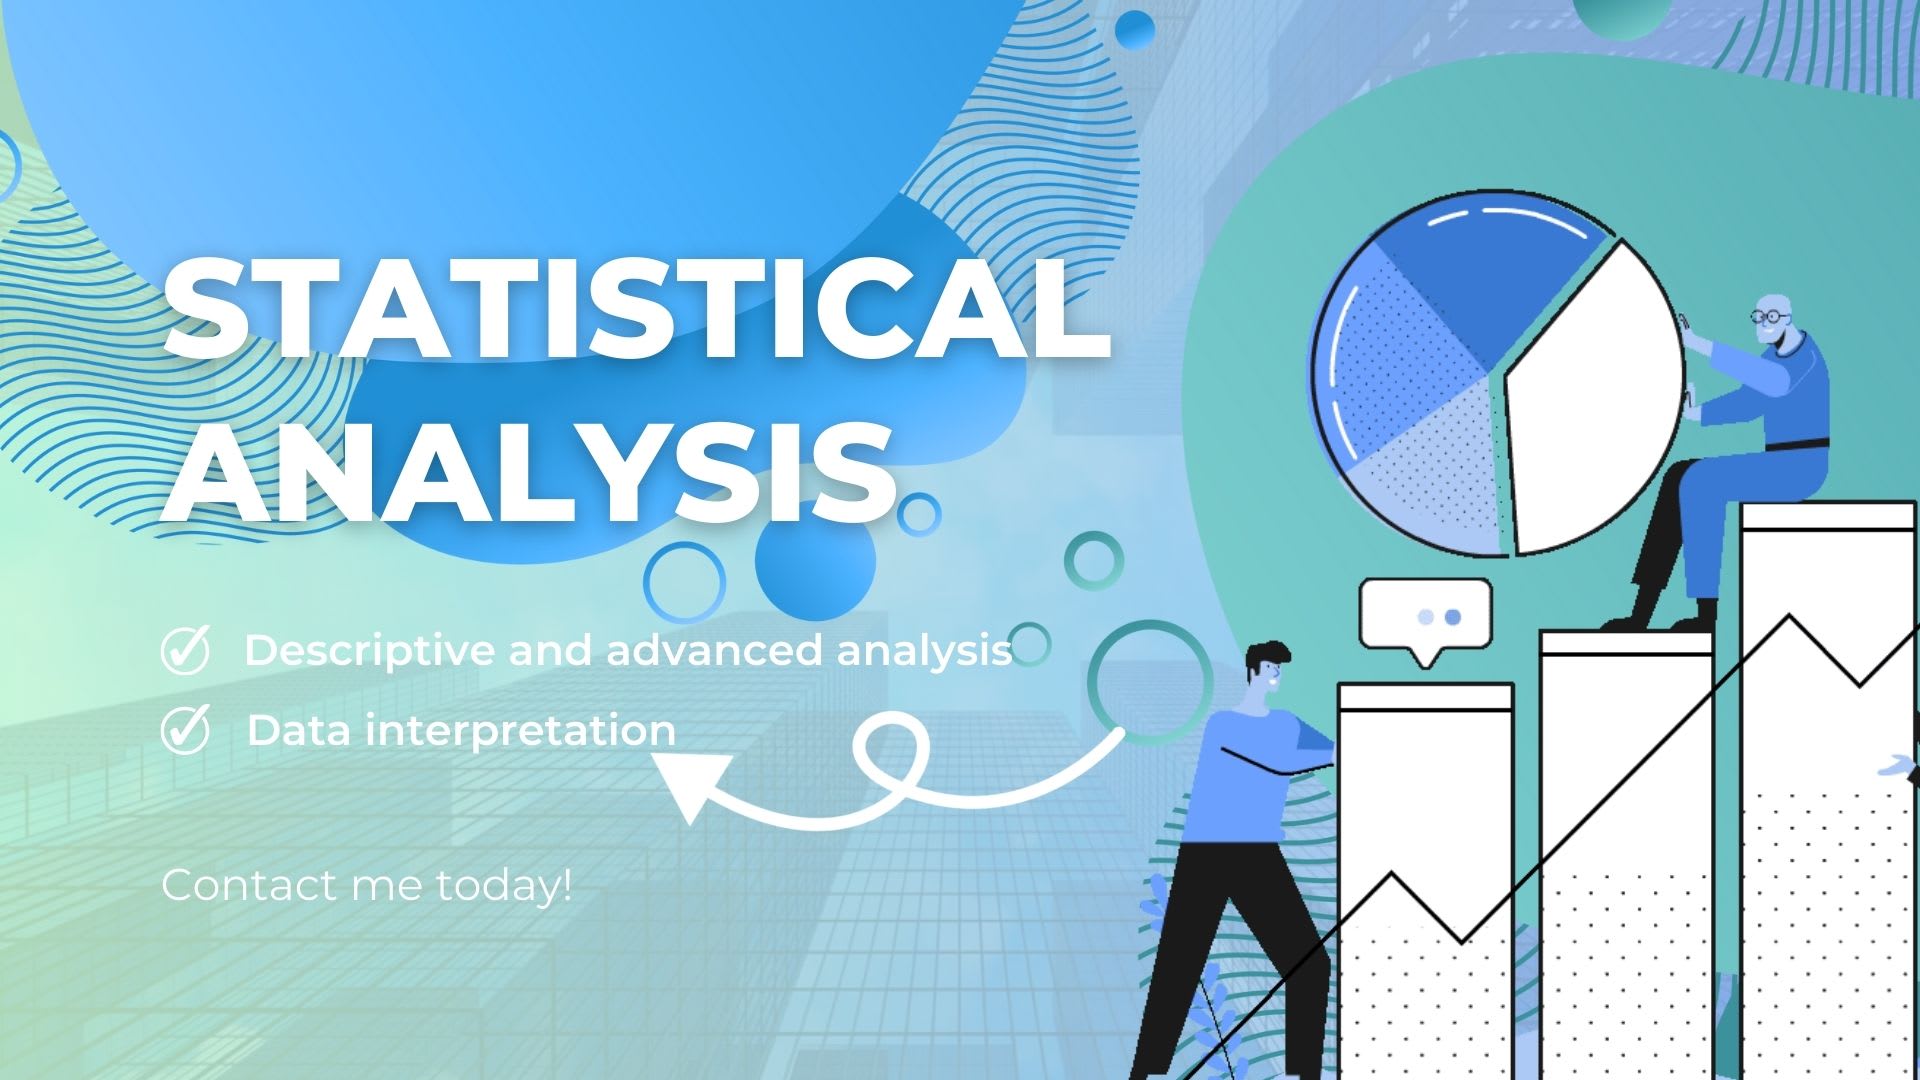 The Statistical Analysis of Data